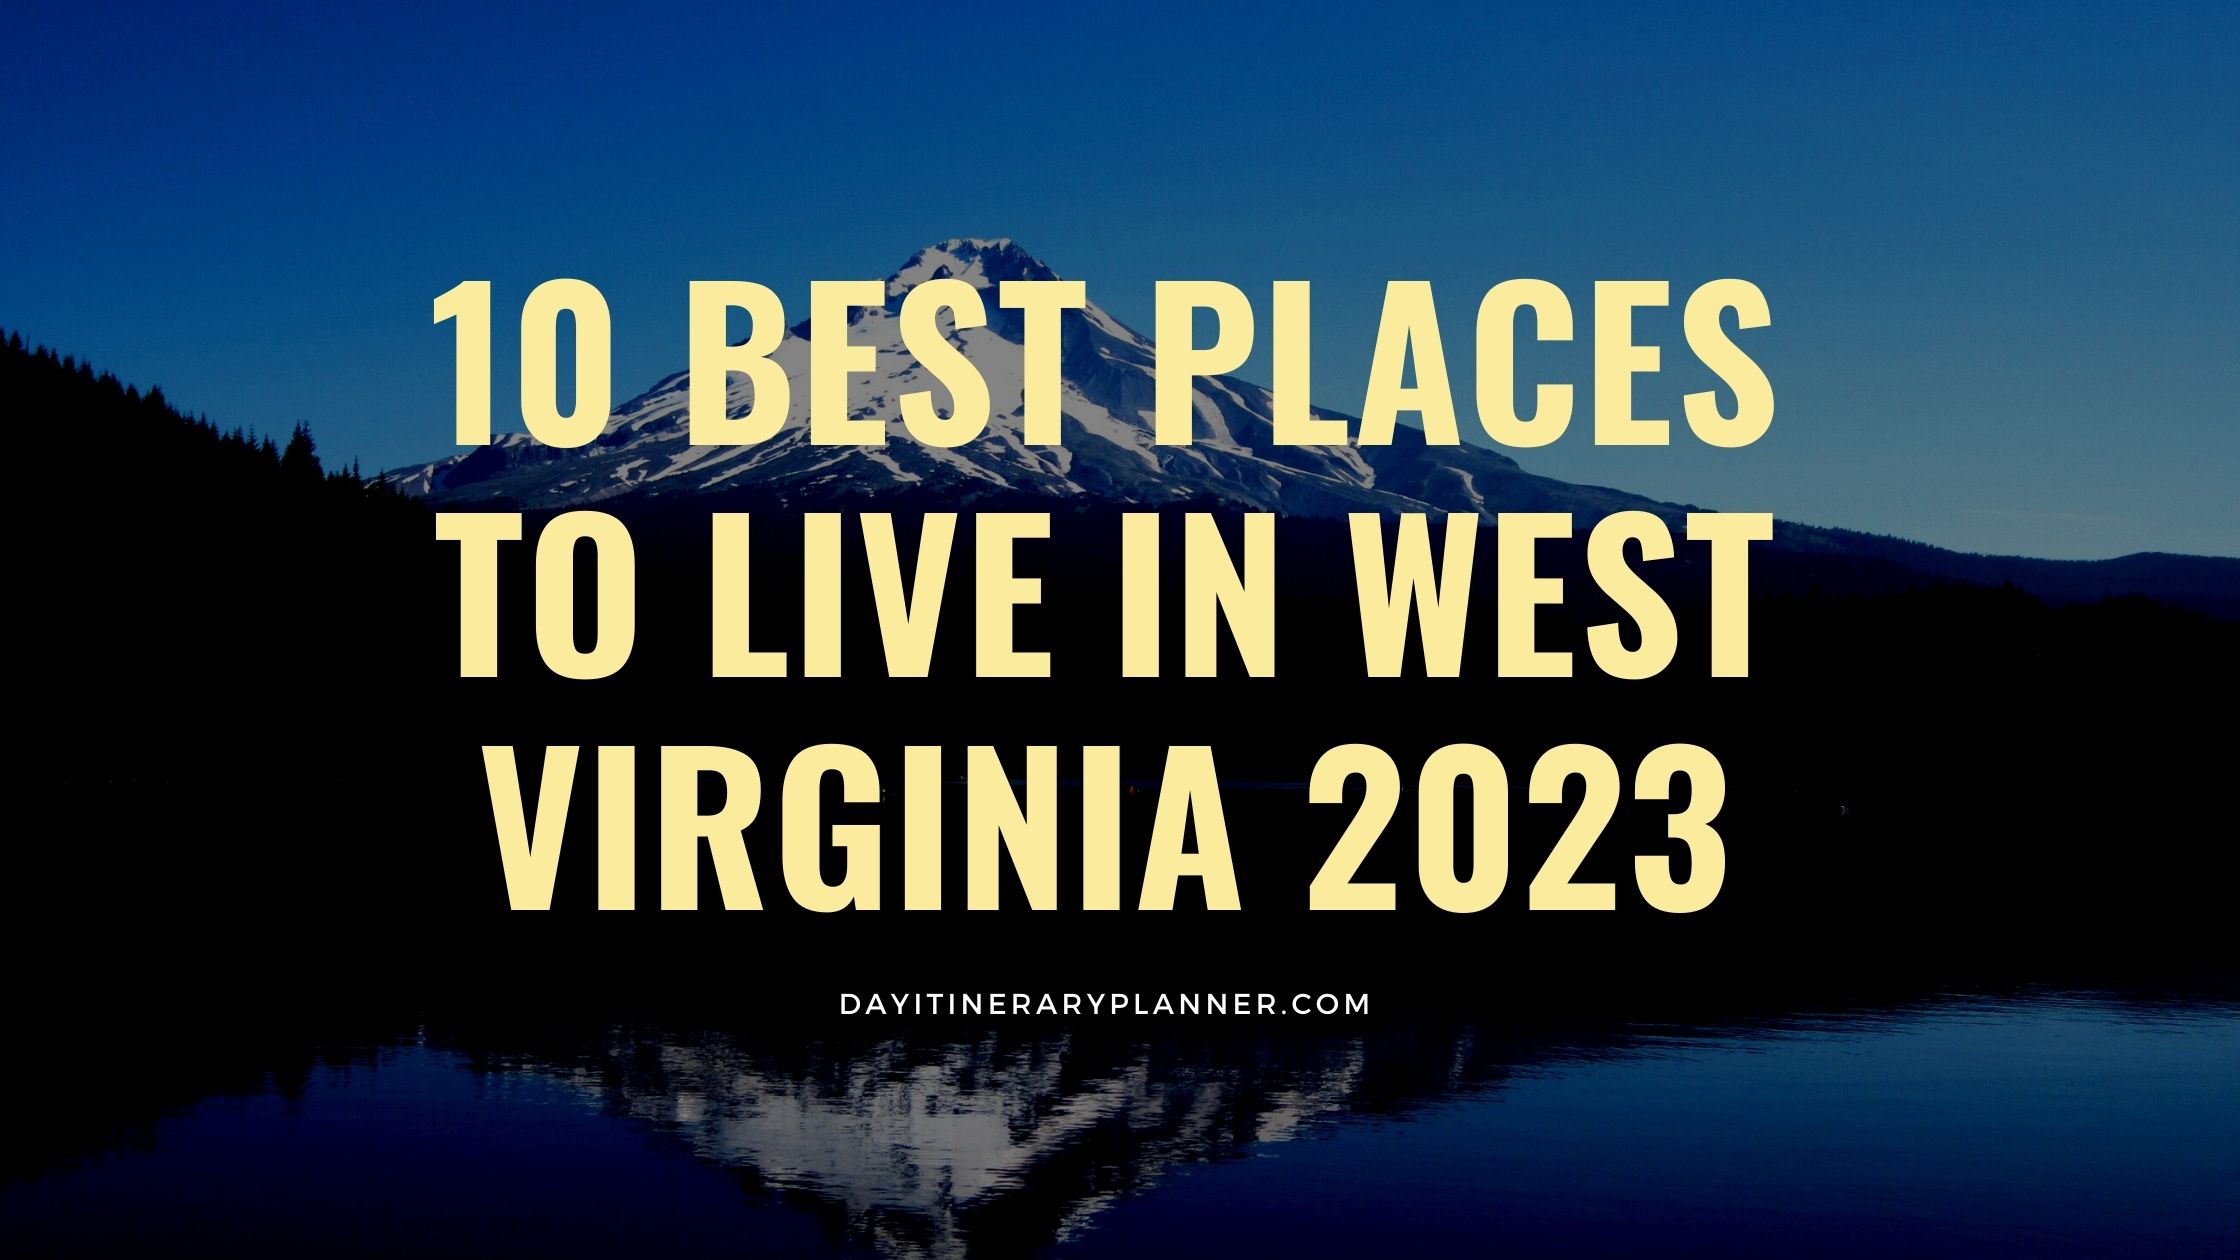 10 Best Places to Live in West Virginia 2023